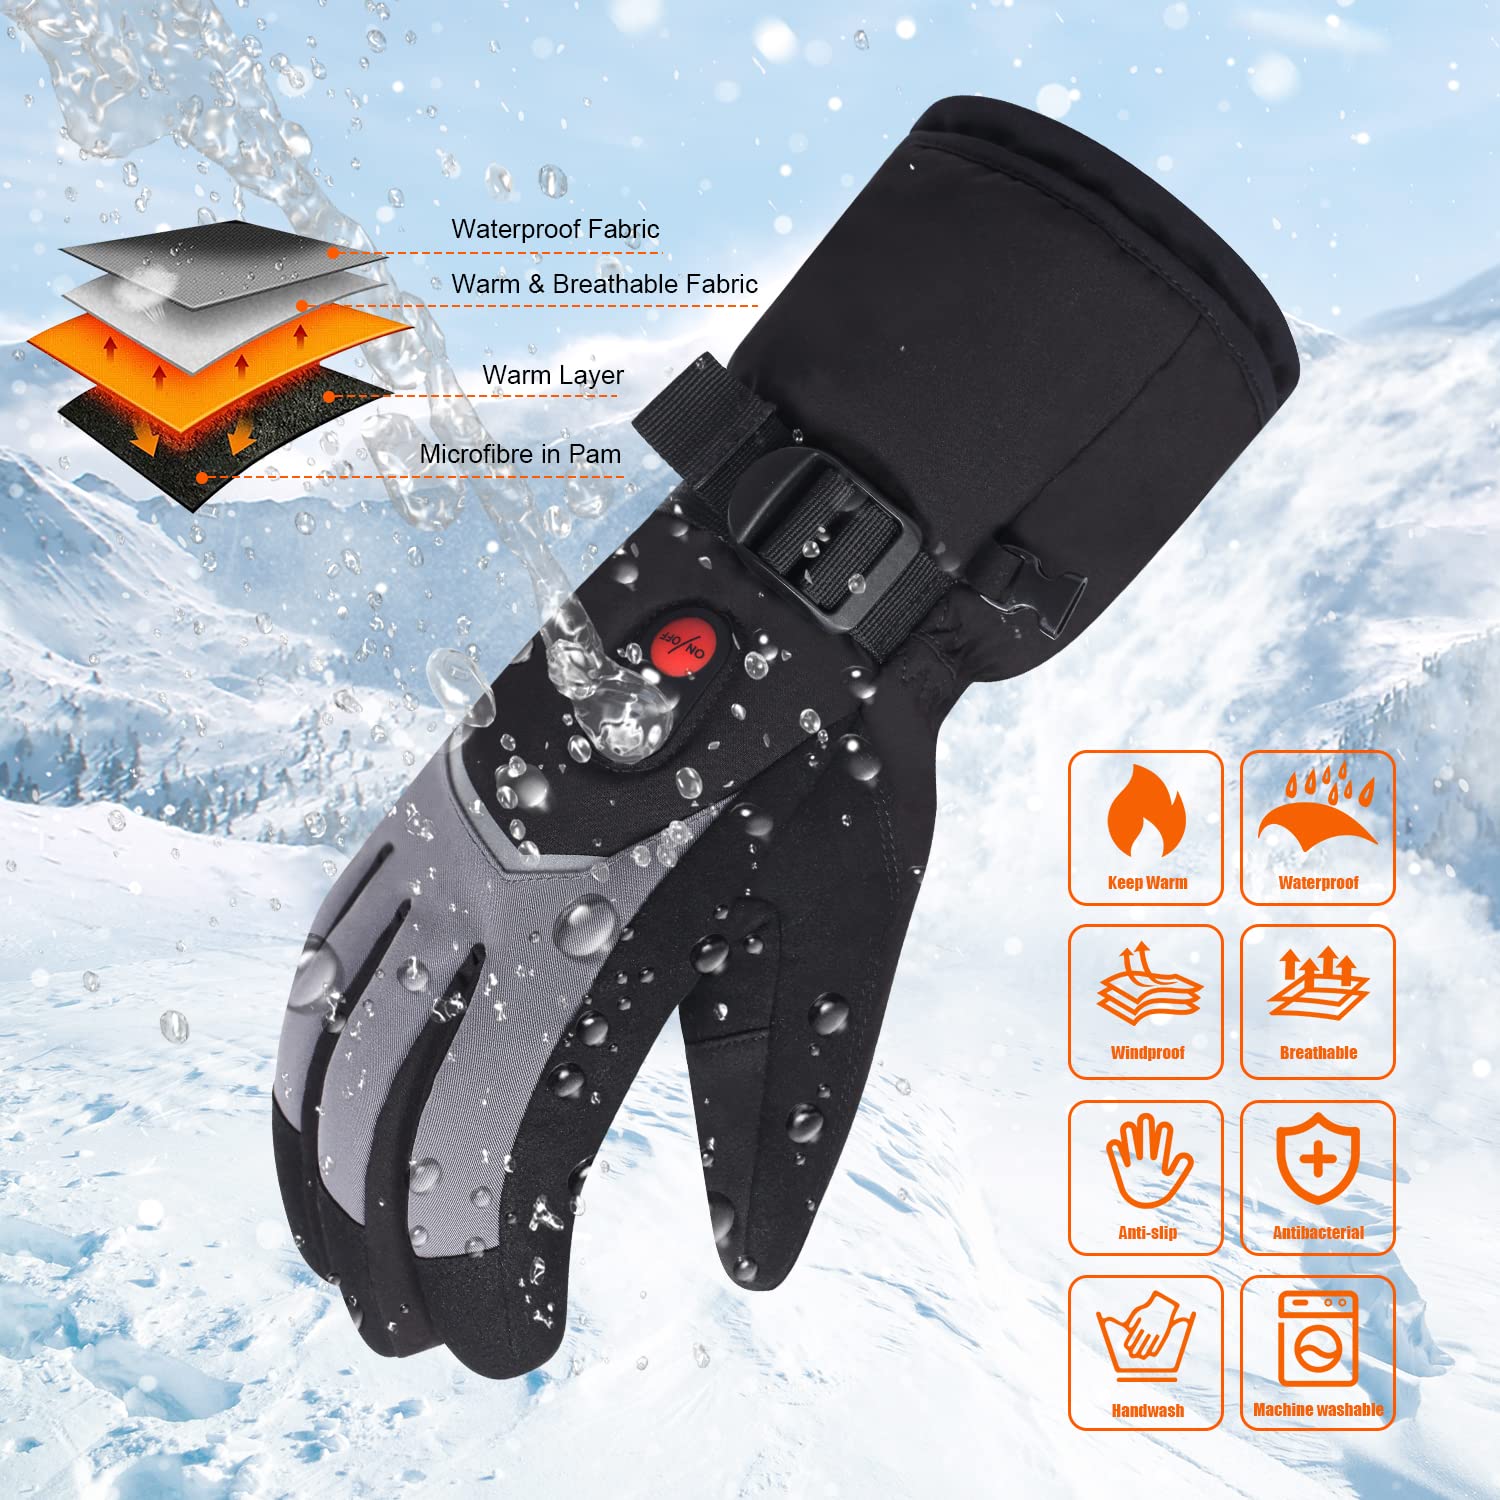 Day Wolf 7.4V Unisex Featherweight Battery Heated Gloves